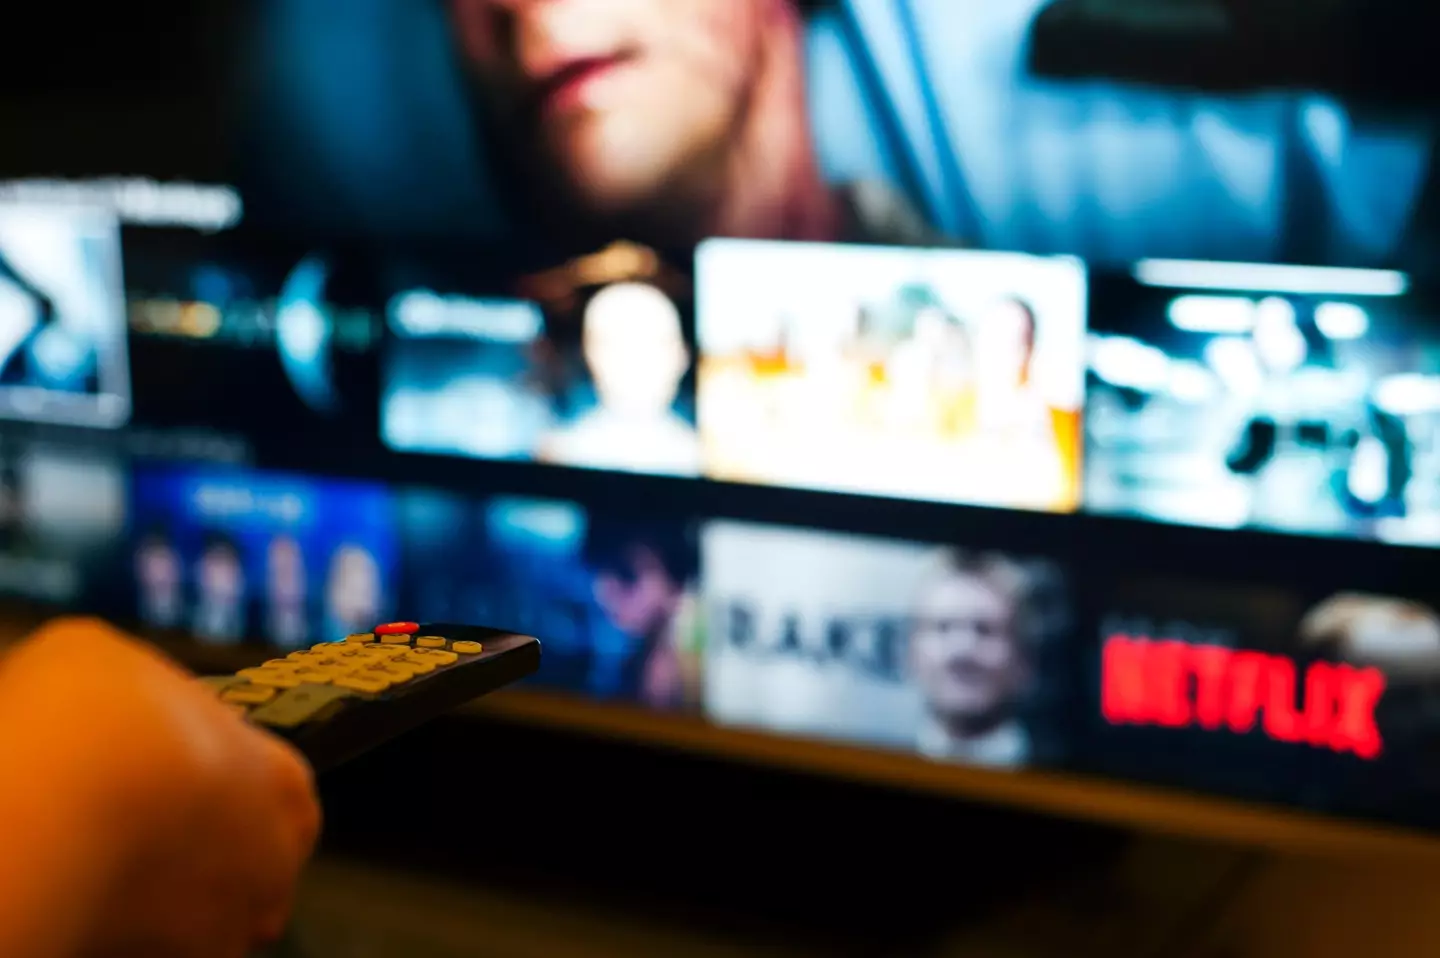 Netflix users could soon face extra charges.